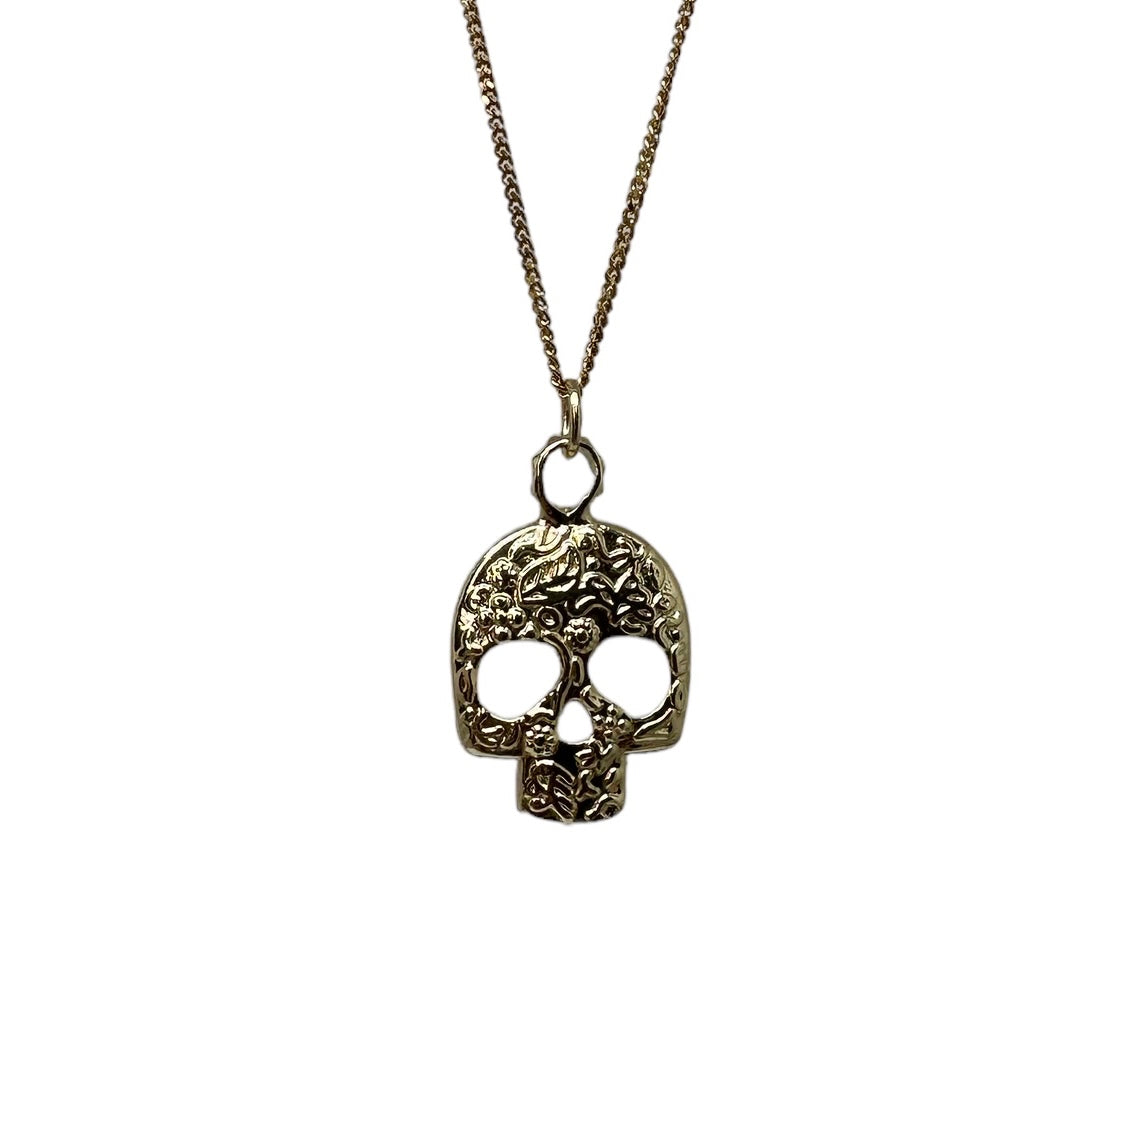 Patterned skull (necklace charm)